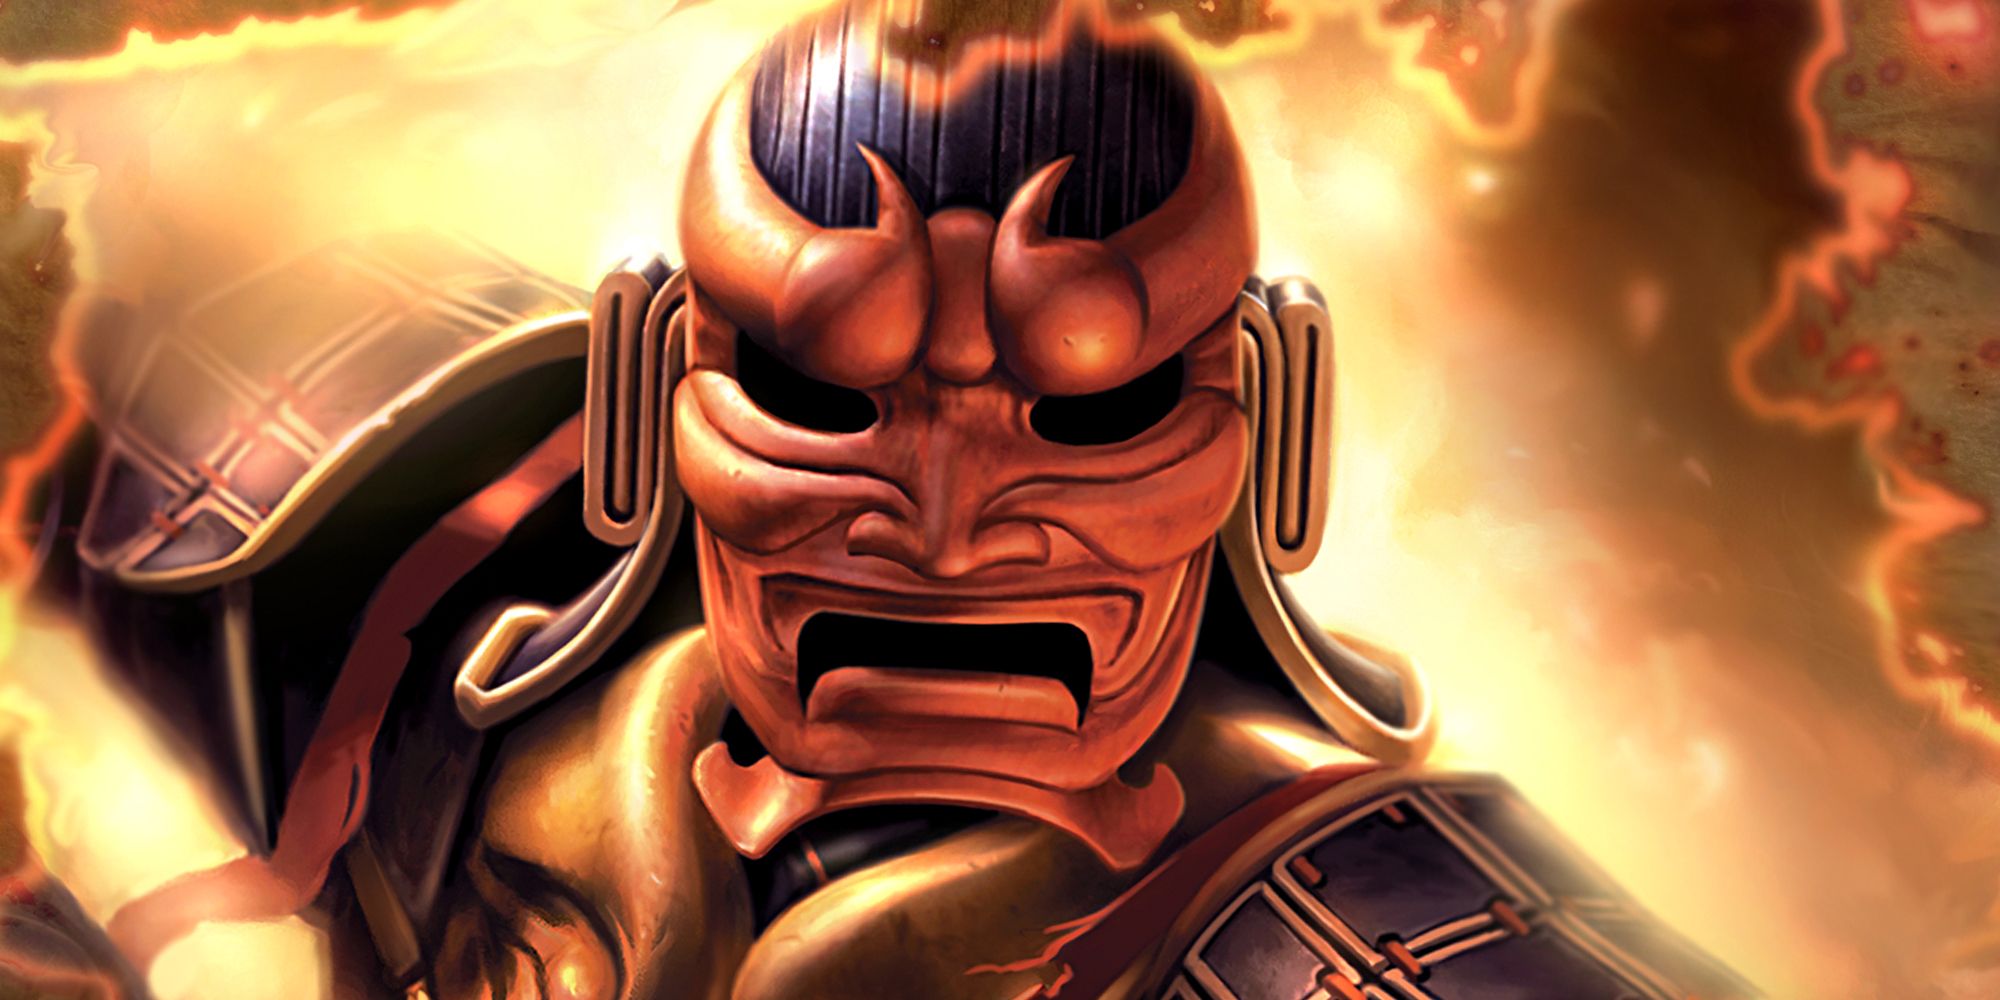 Jade Empire Bioware RPG promotional photo. Warrior wearing a red mask.